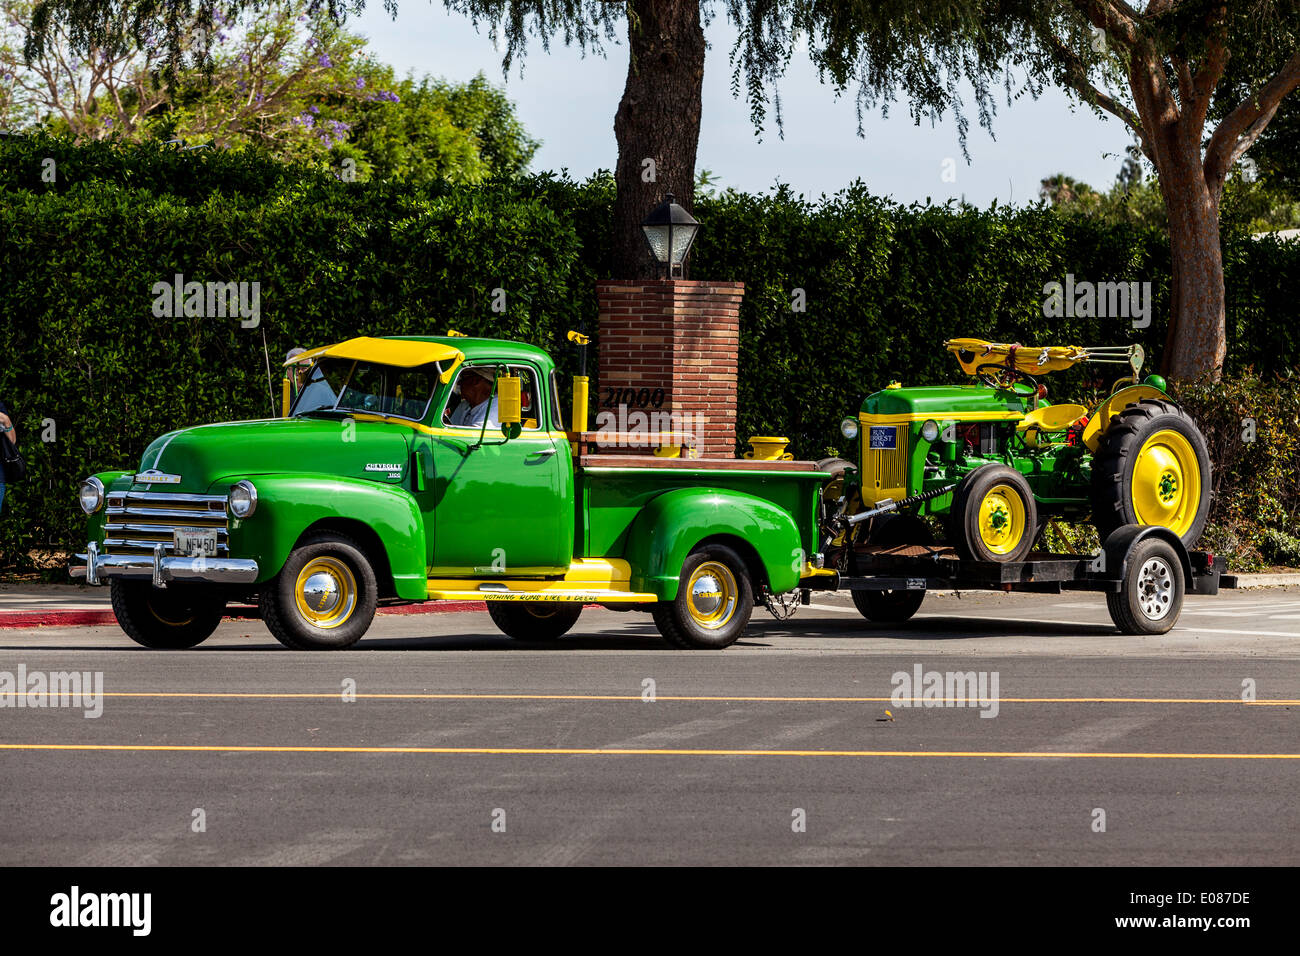 A 1950's Chevy Truck with matching John Deere Tractor Stock Photo